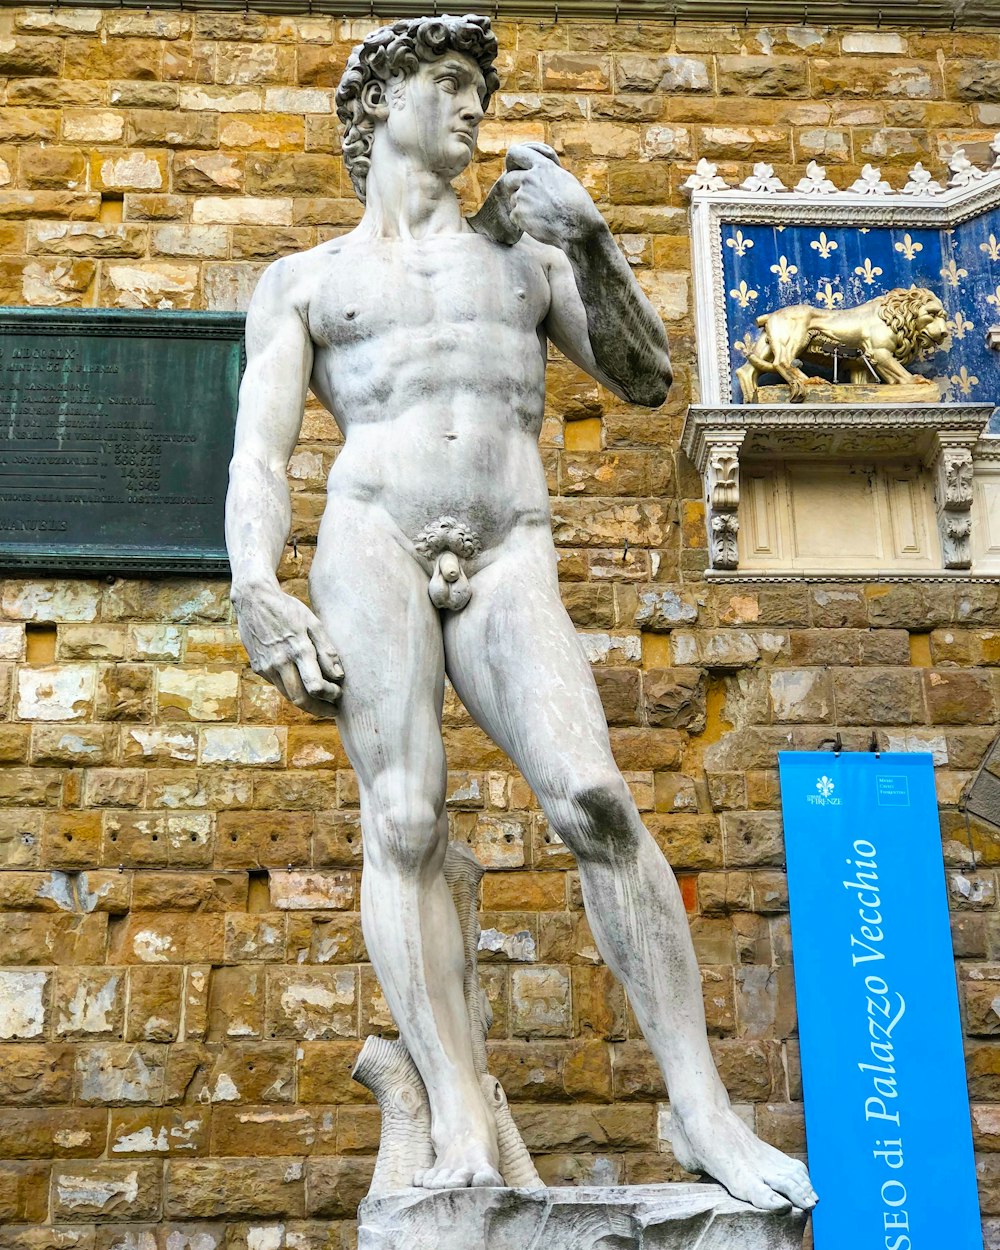 a statue of a man standing in front of a building